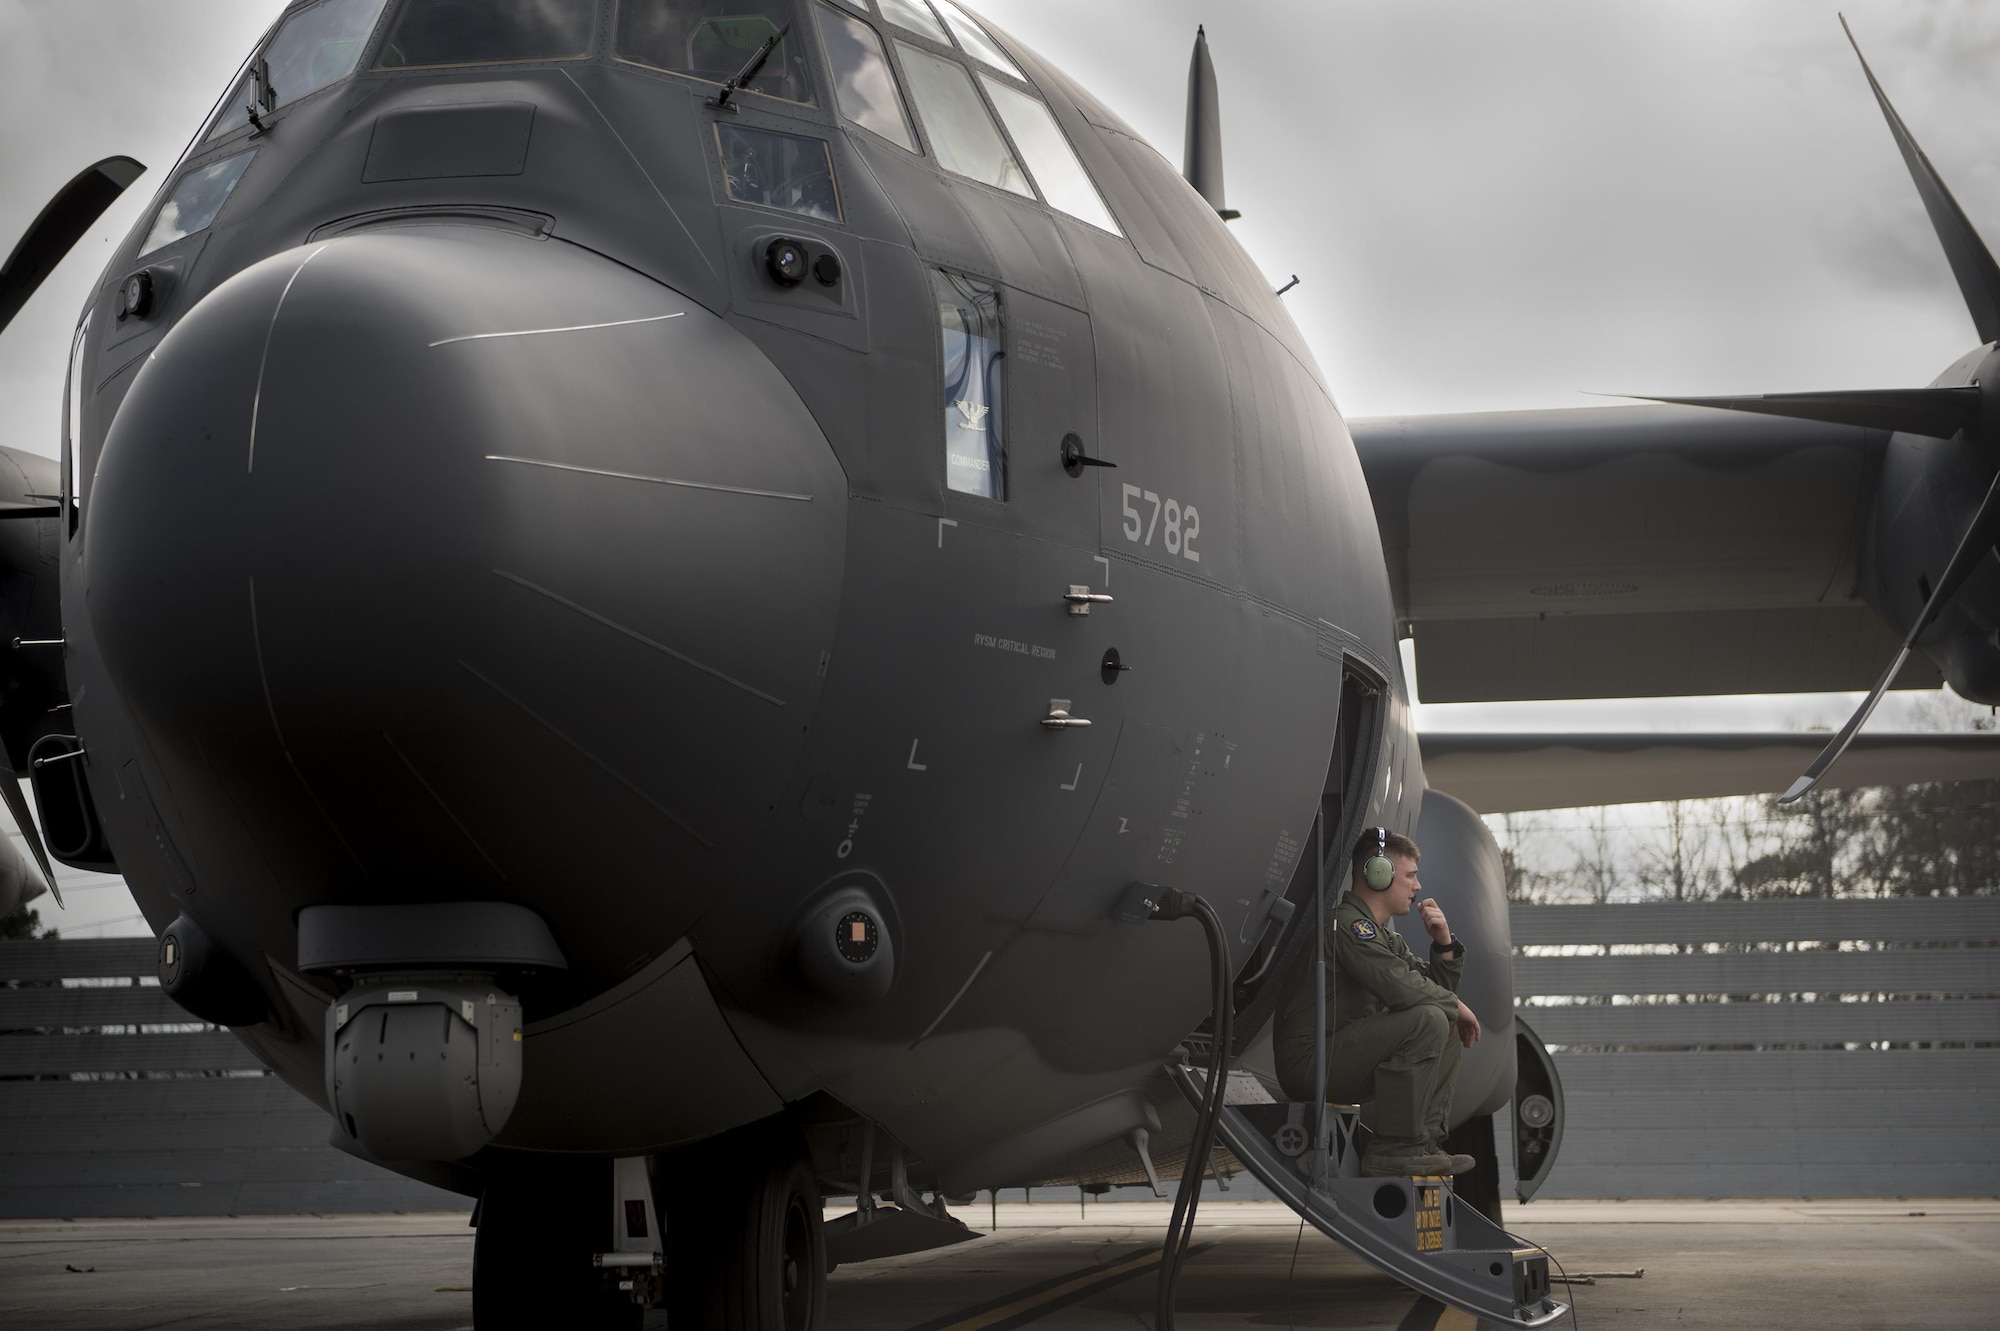 Senior Airman Kevin O’Neil, a 71st Rescue Squadron loadmaster, waits for engine startup Dec. 11, 2015, at a Lockheed Martin Corp. C-130 ramp in Marietta, Ga. The HC-130J Combat King II is the 2,500th C-130 manufactured by Lockheed Martin and is the seventh HC-130J the 71st RQS has received. (U.S. Air Force photo/Senior Airman Ryan Callaghan)